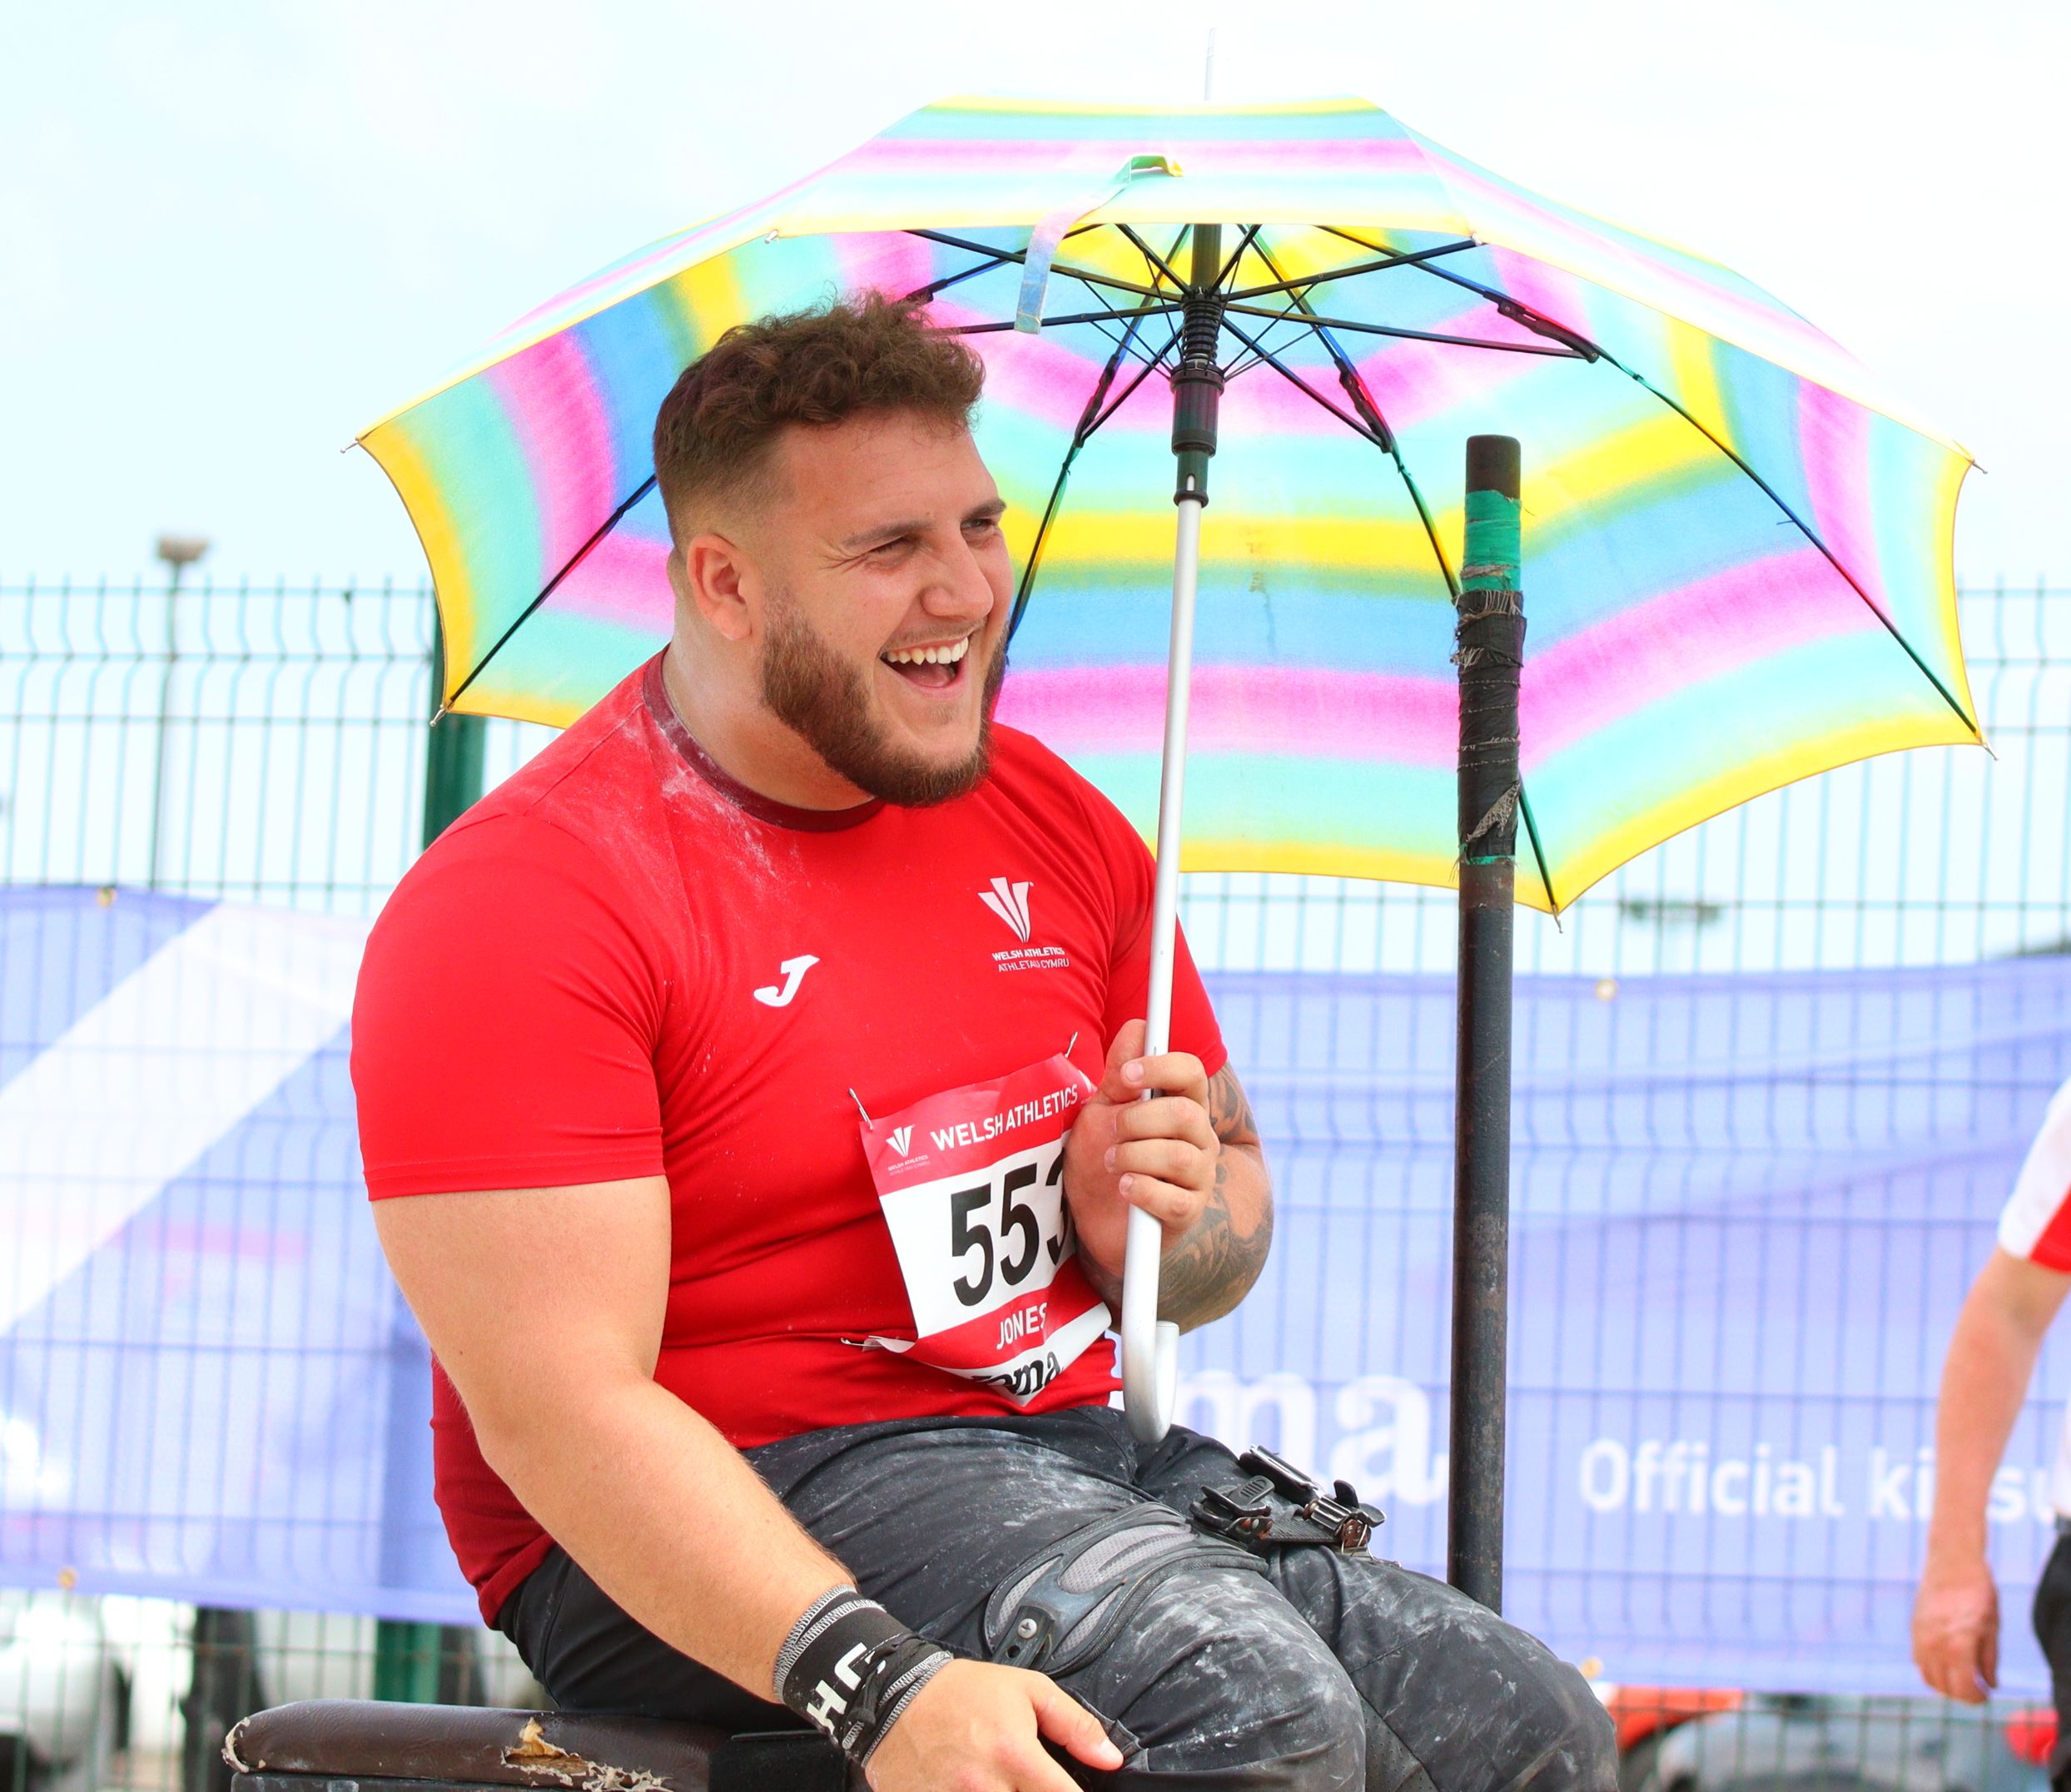 Keiran Jones Is Firmly In The Driving Seat As Welsh Para Stars Take Centre Stage